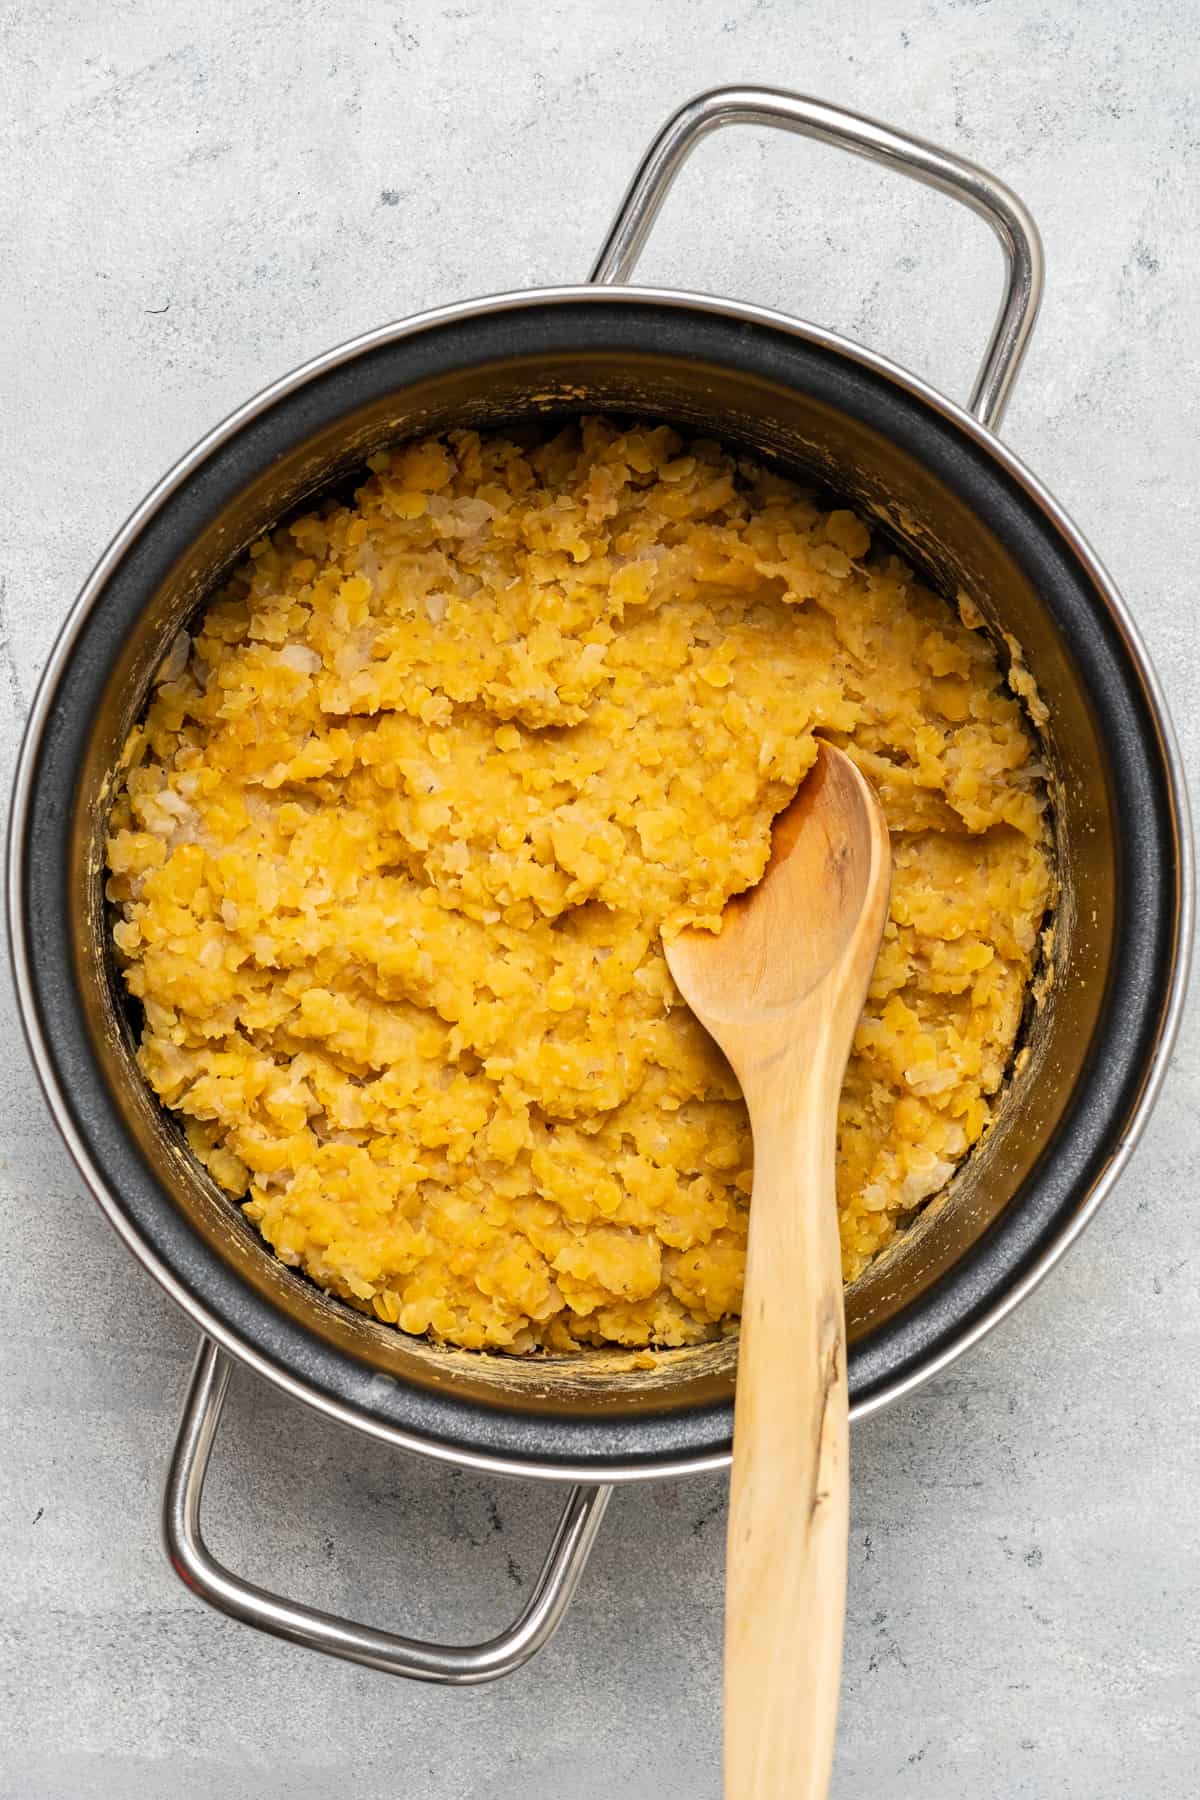 Cooked red lentils in a pot and a wooden spoon inside it.